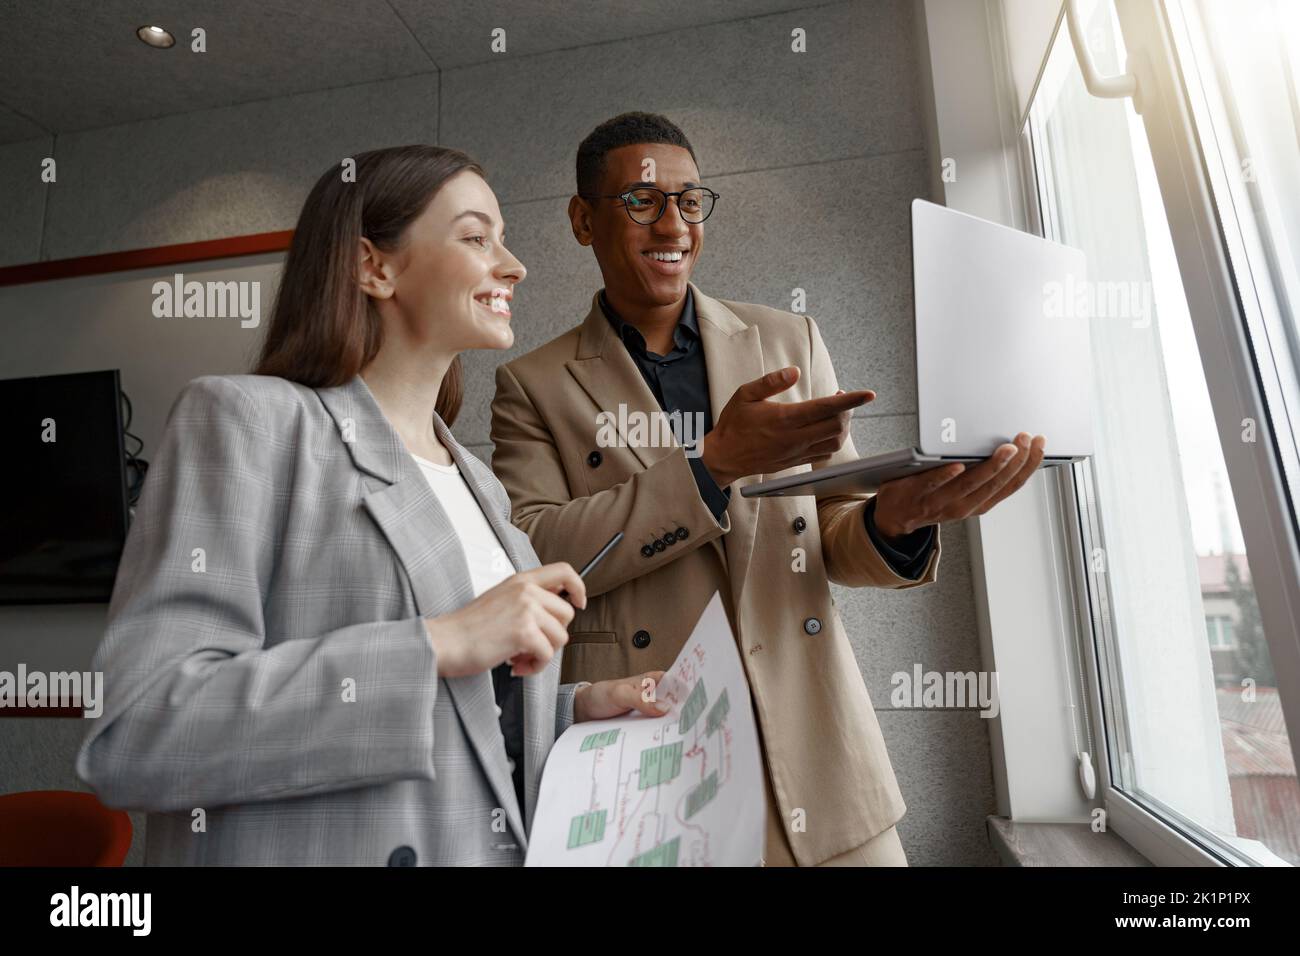 Two smiling business people working with laptop together standing near window Stock Photo